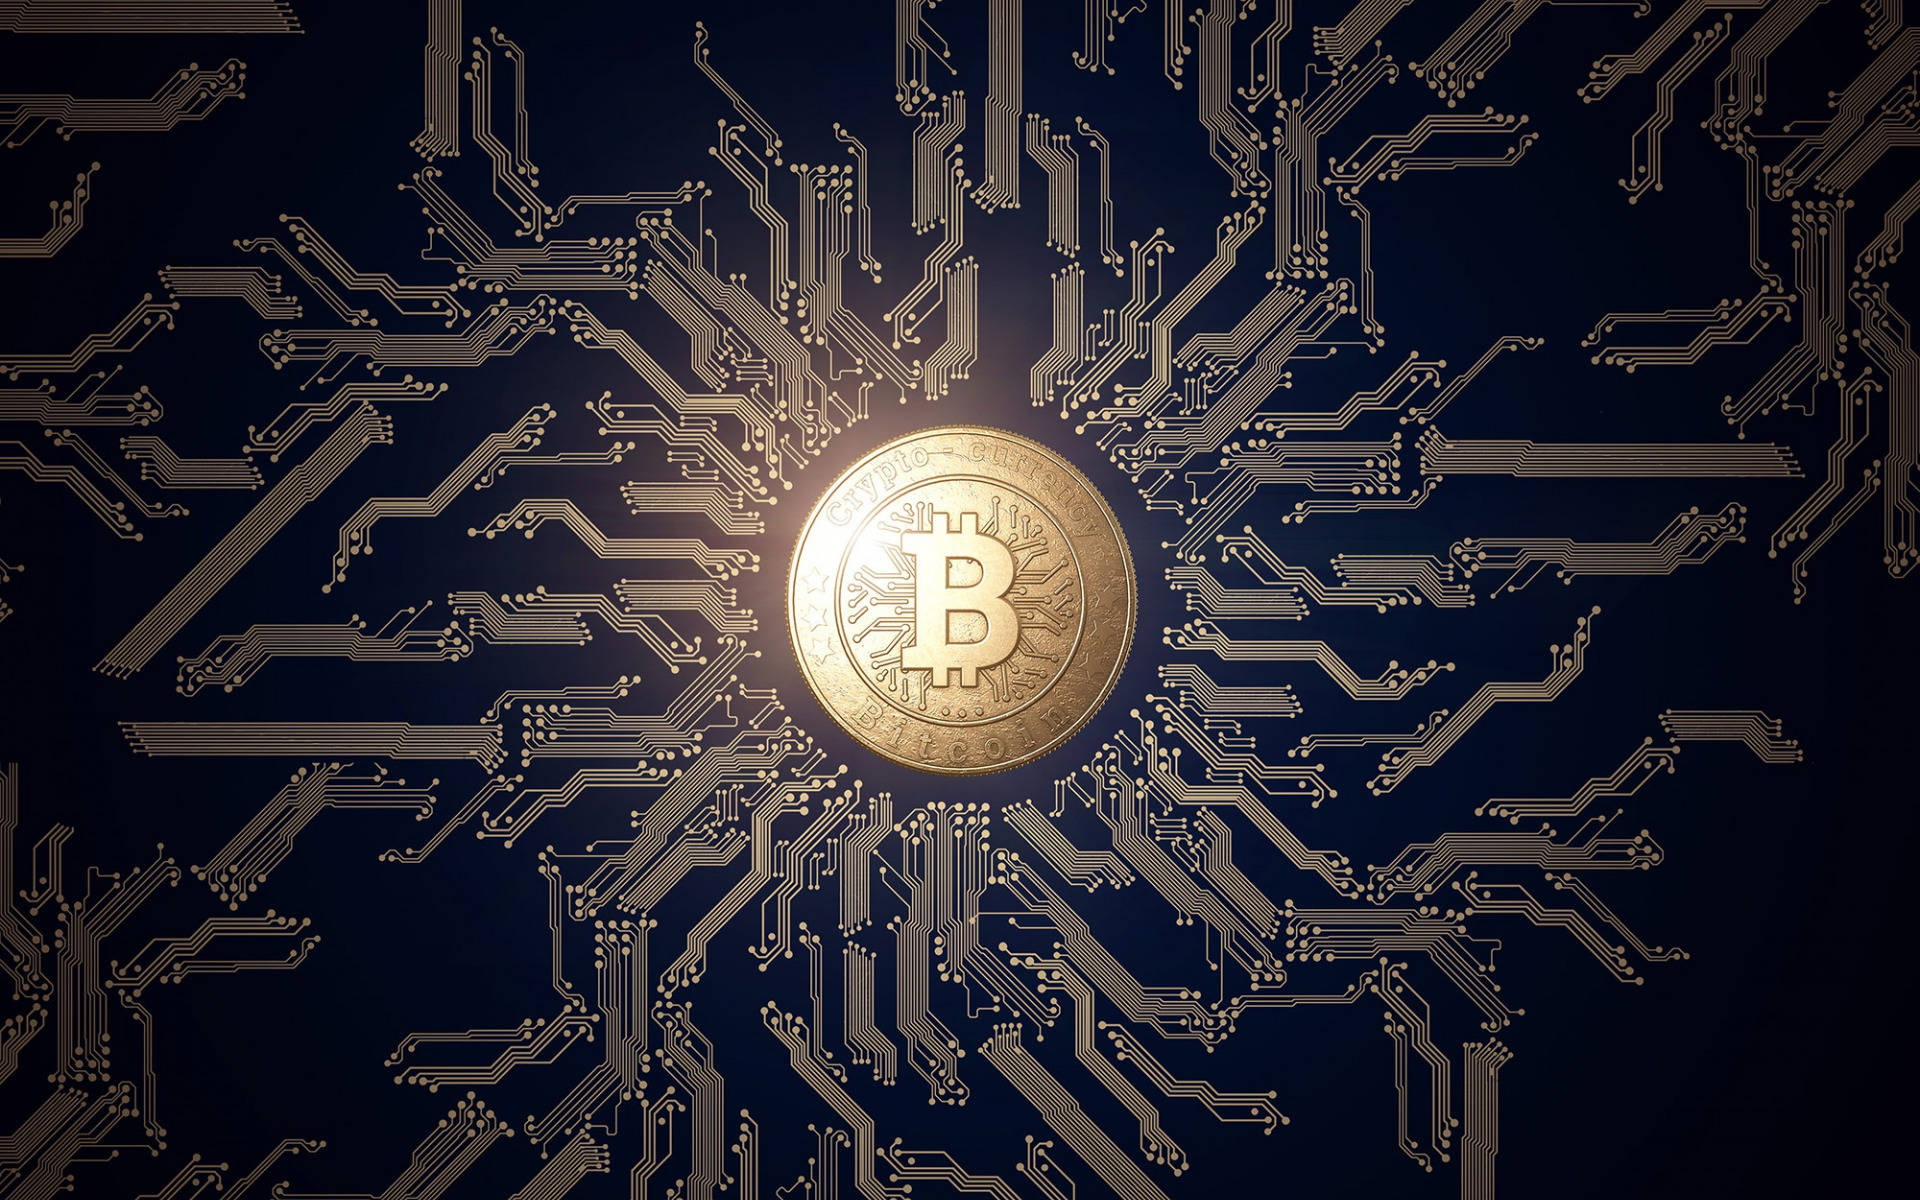 An Interesting Photo Of A Gold Bitcoin Against A Navy Blue Motherboard For A Crypto Desktop Background